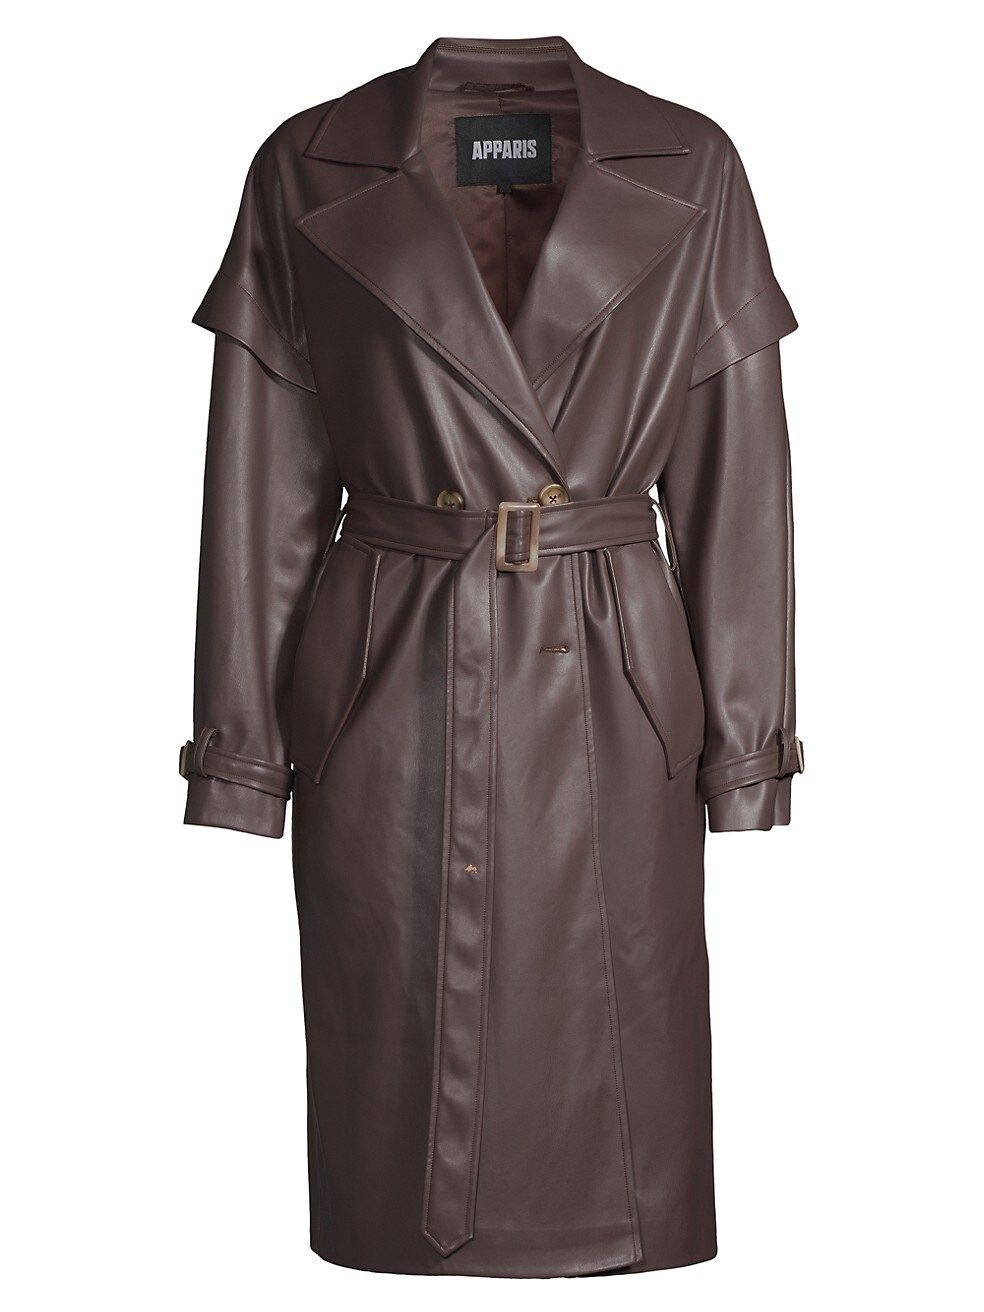 Apparis Natalia Belted Faux Leather Trench Coat | Saks Fifth Avenue